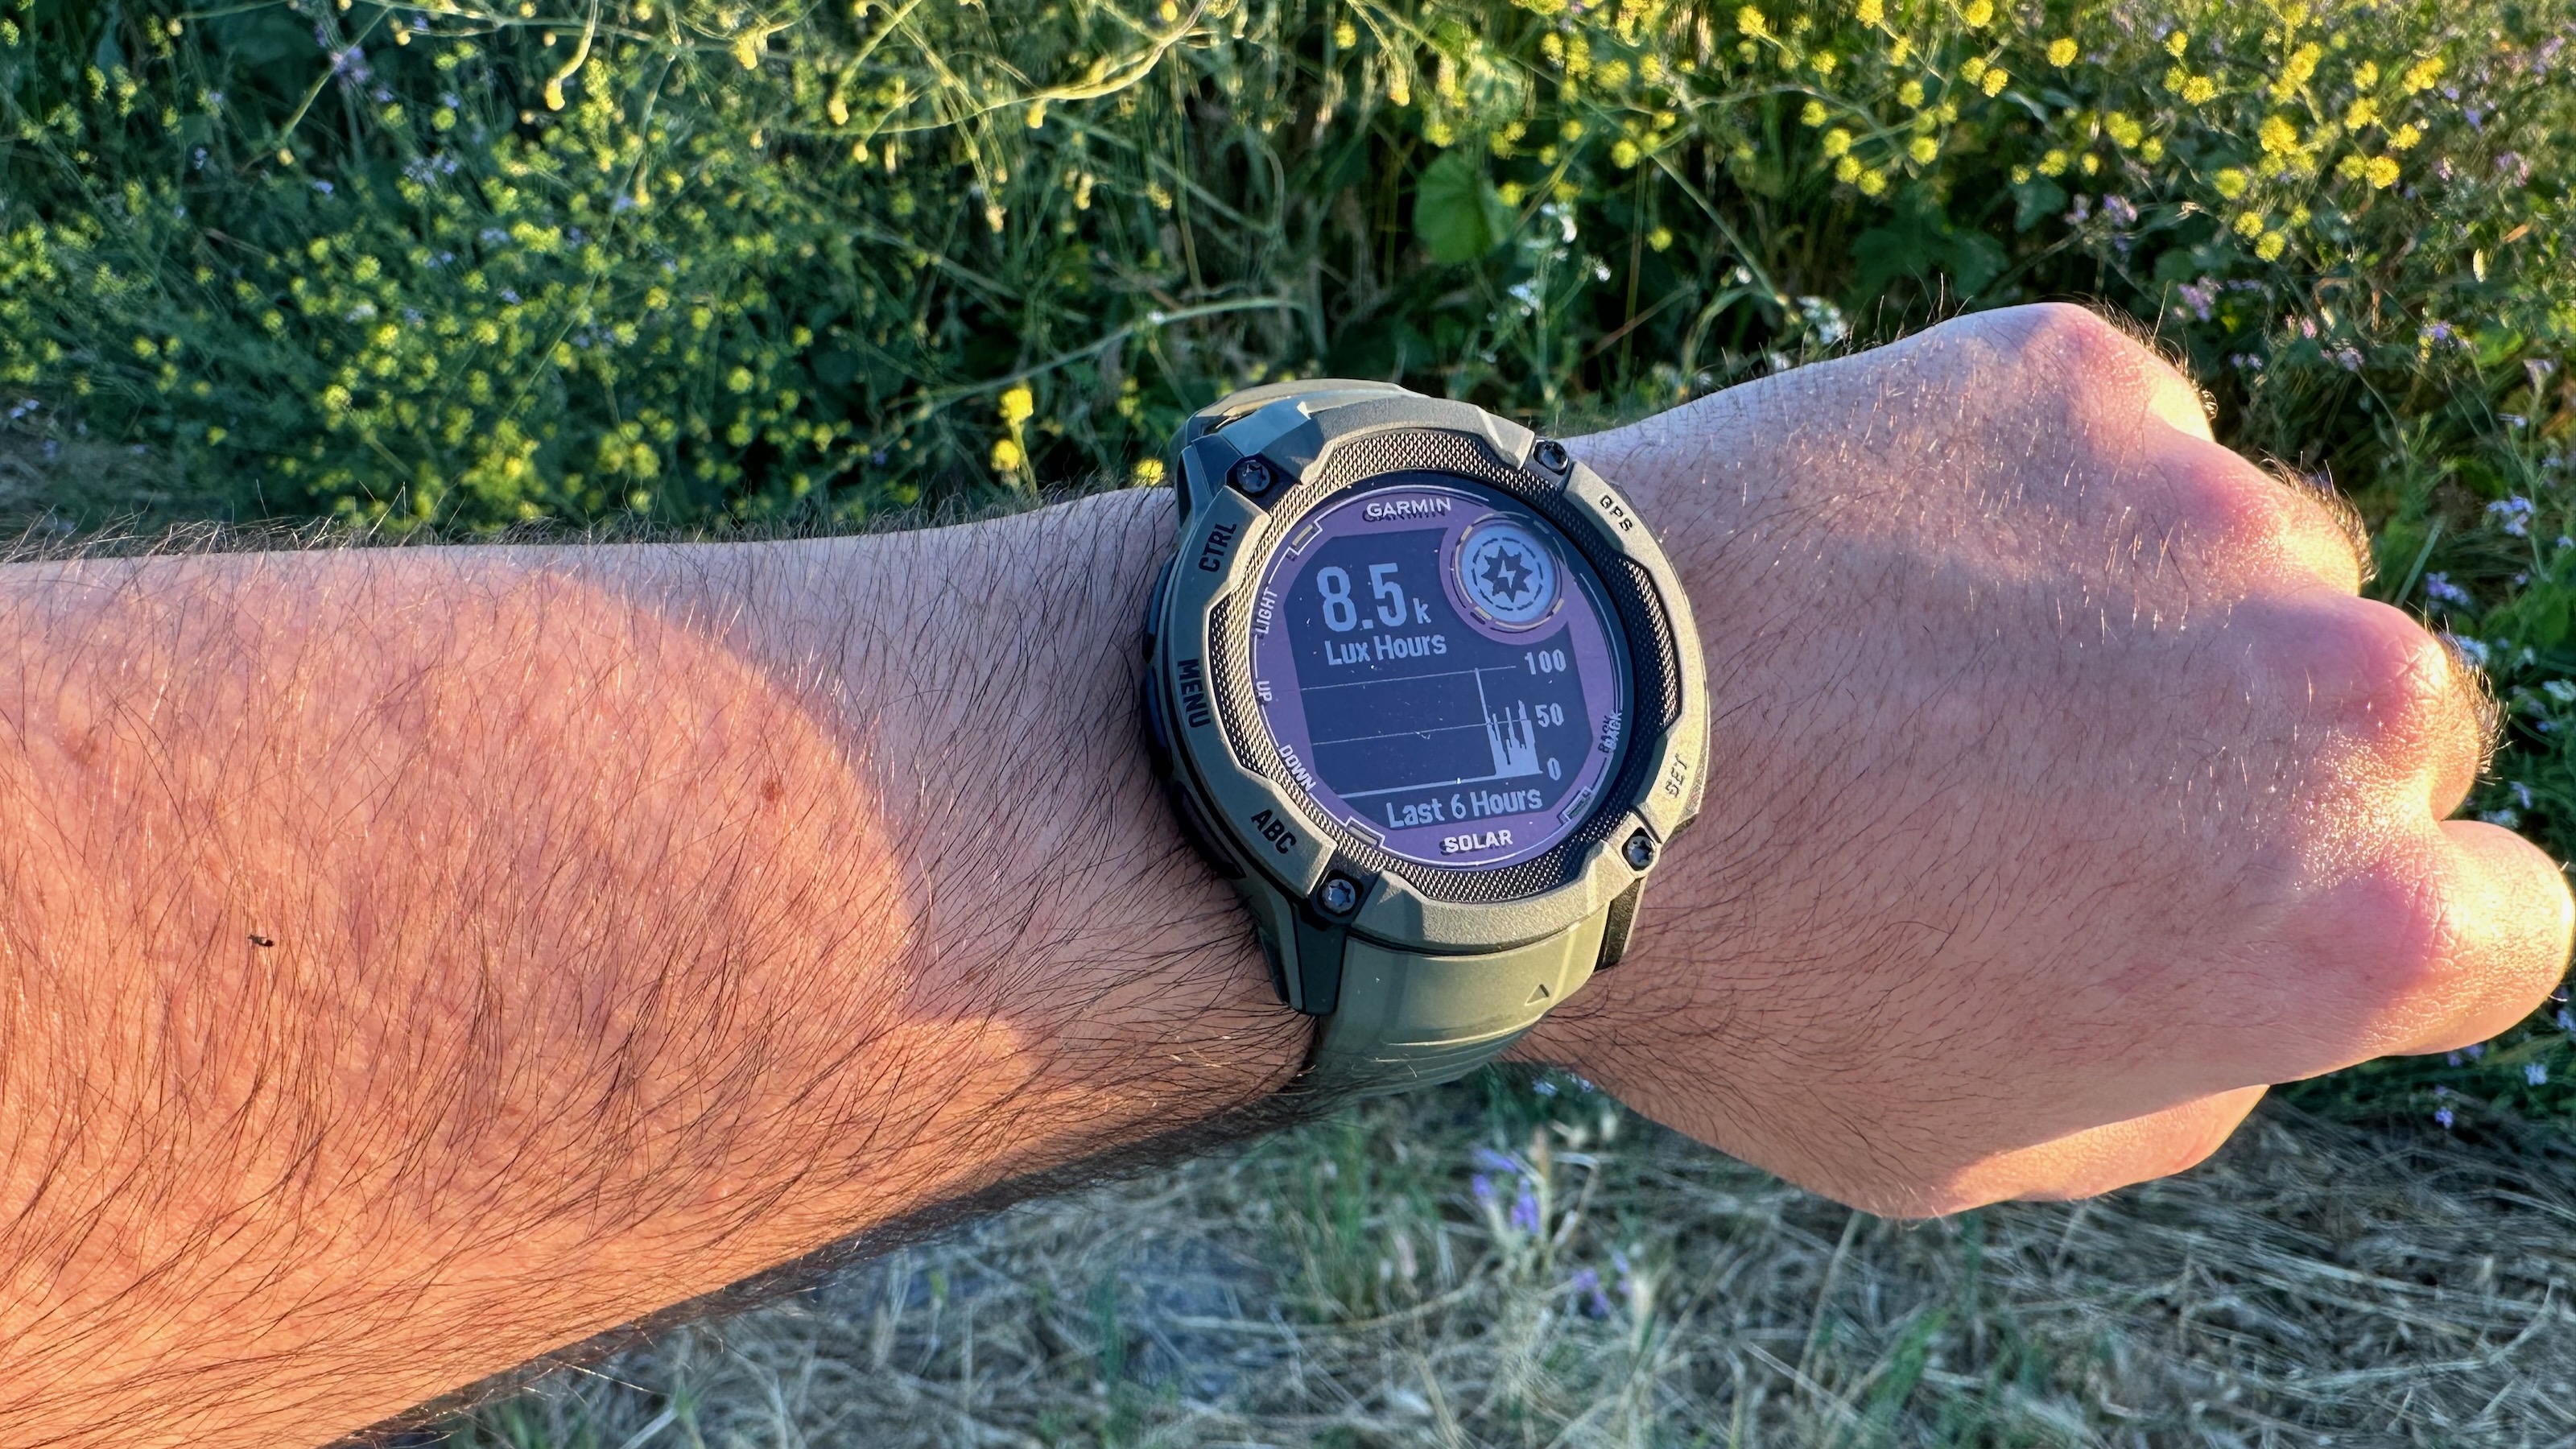 The Garmin Instinct 2X Solar worn at sunset, showing the lux hours picked up by the watch's solar panel in the last six hours.